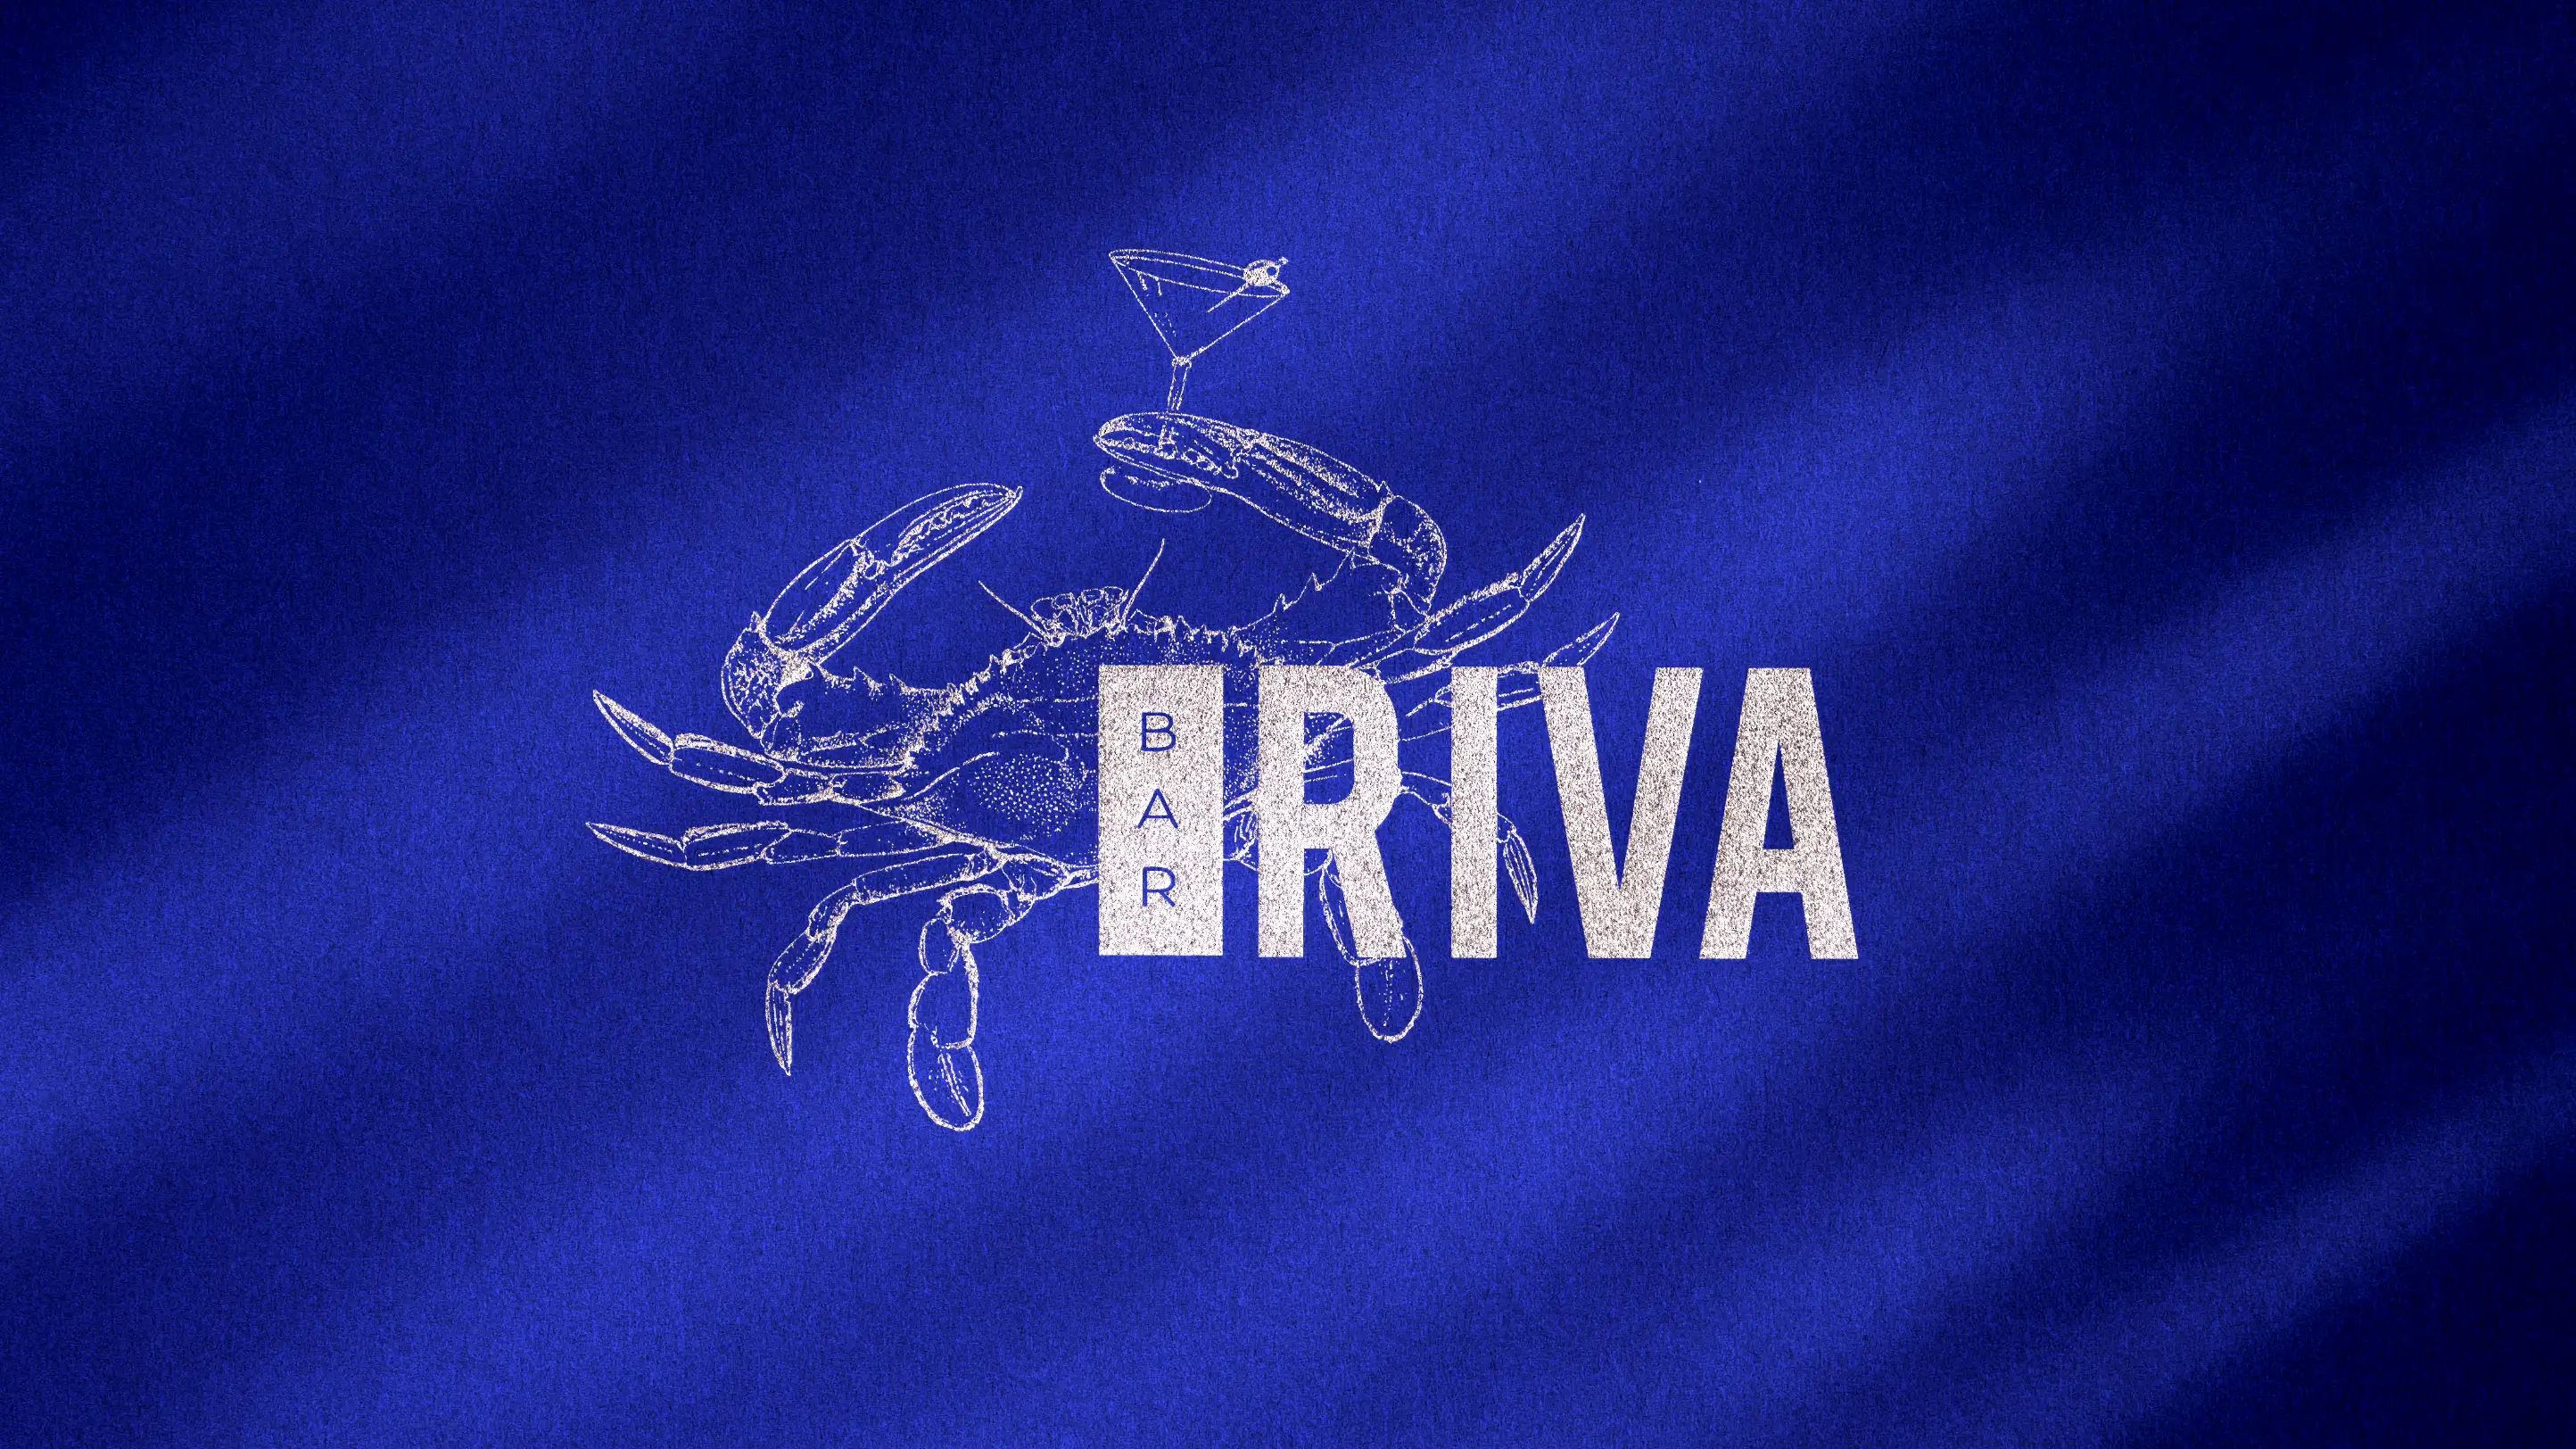 Bar Riva crab logo with light texture on deep blue background.